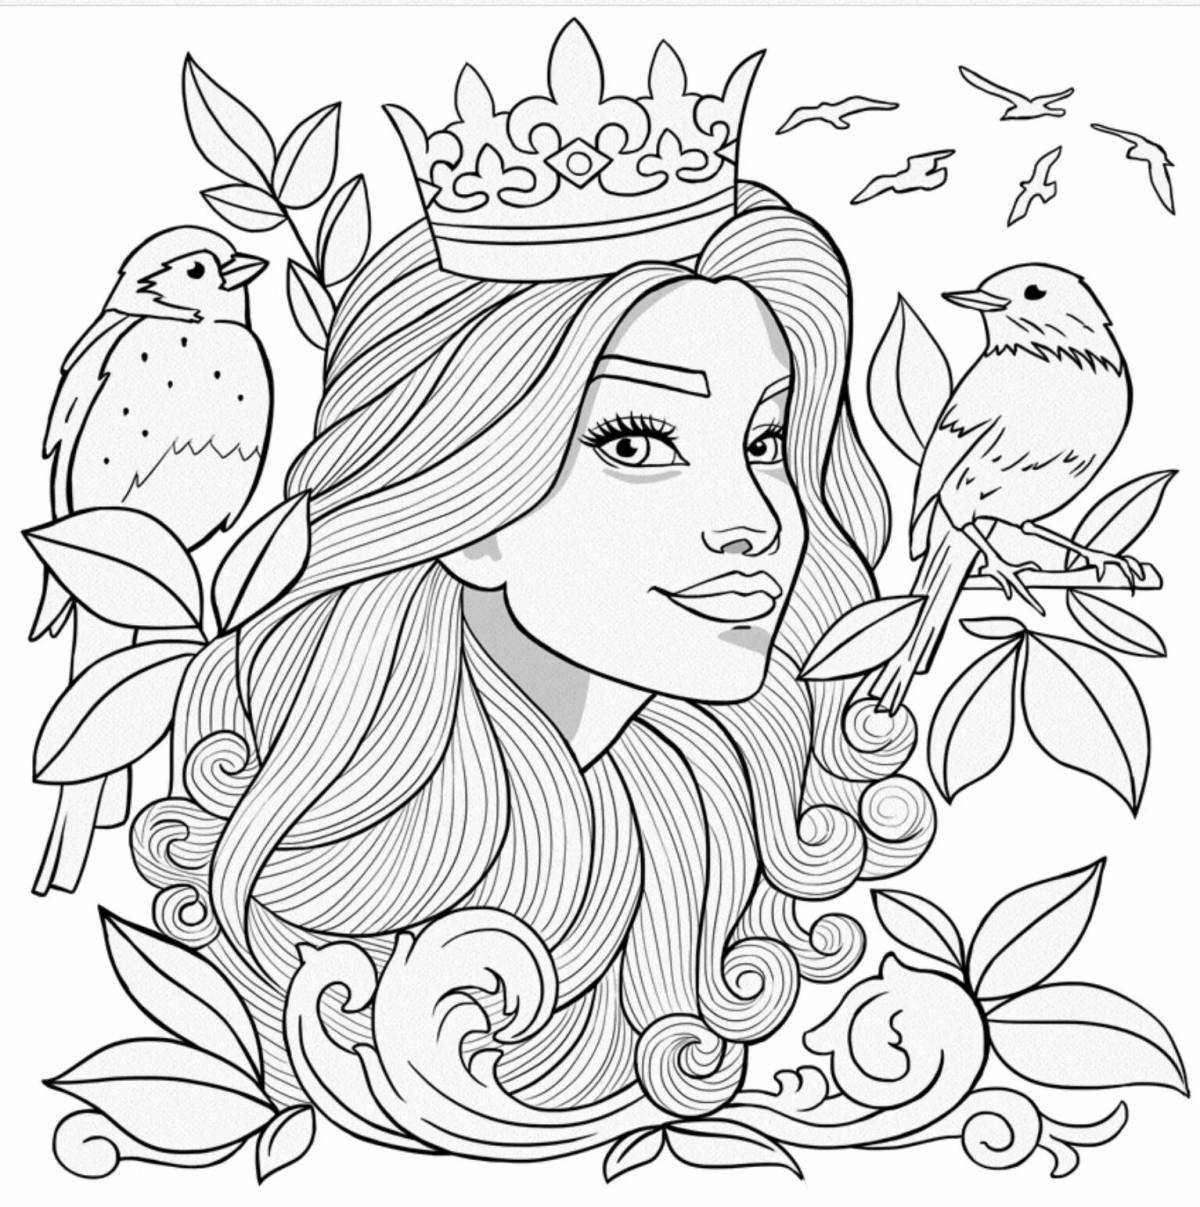 Color-mania coloring page for 11 year old girls